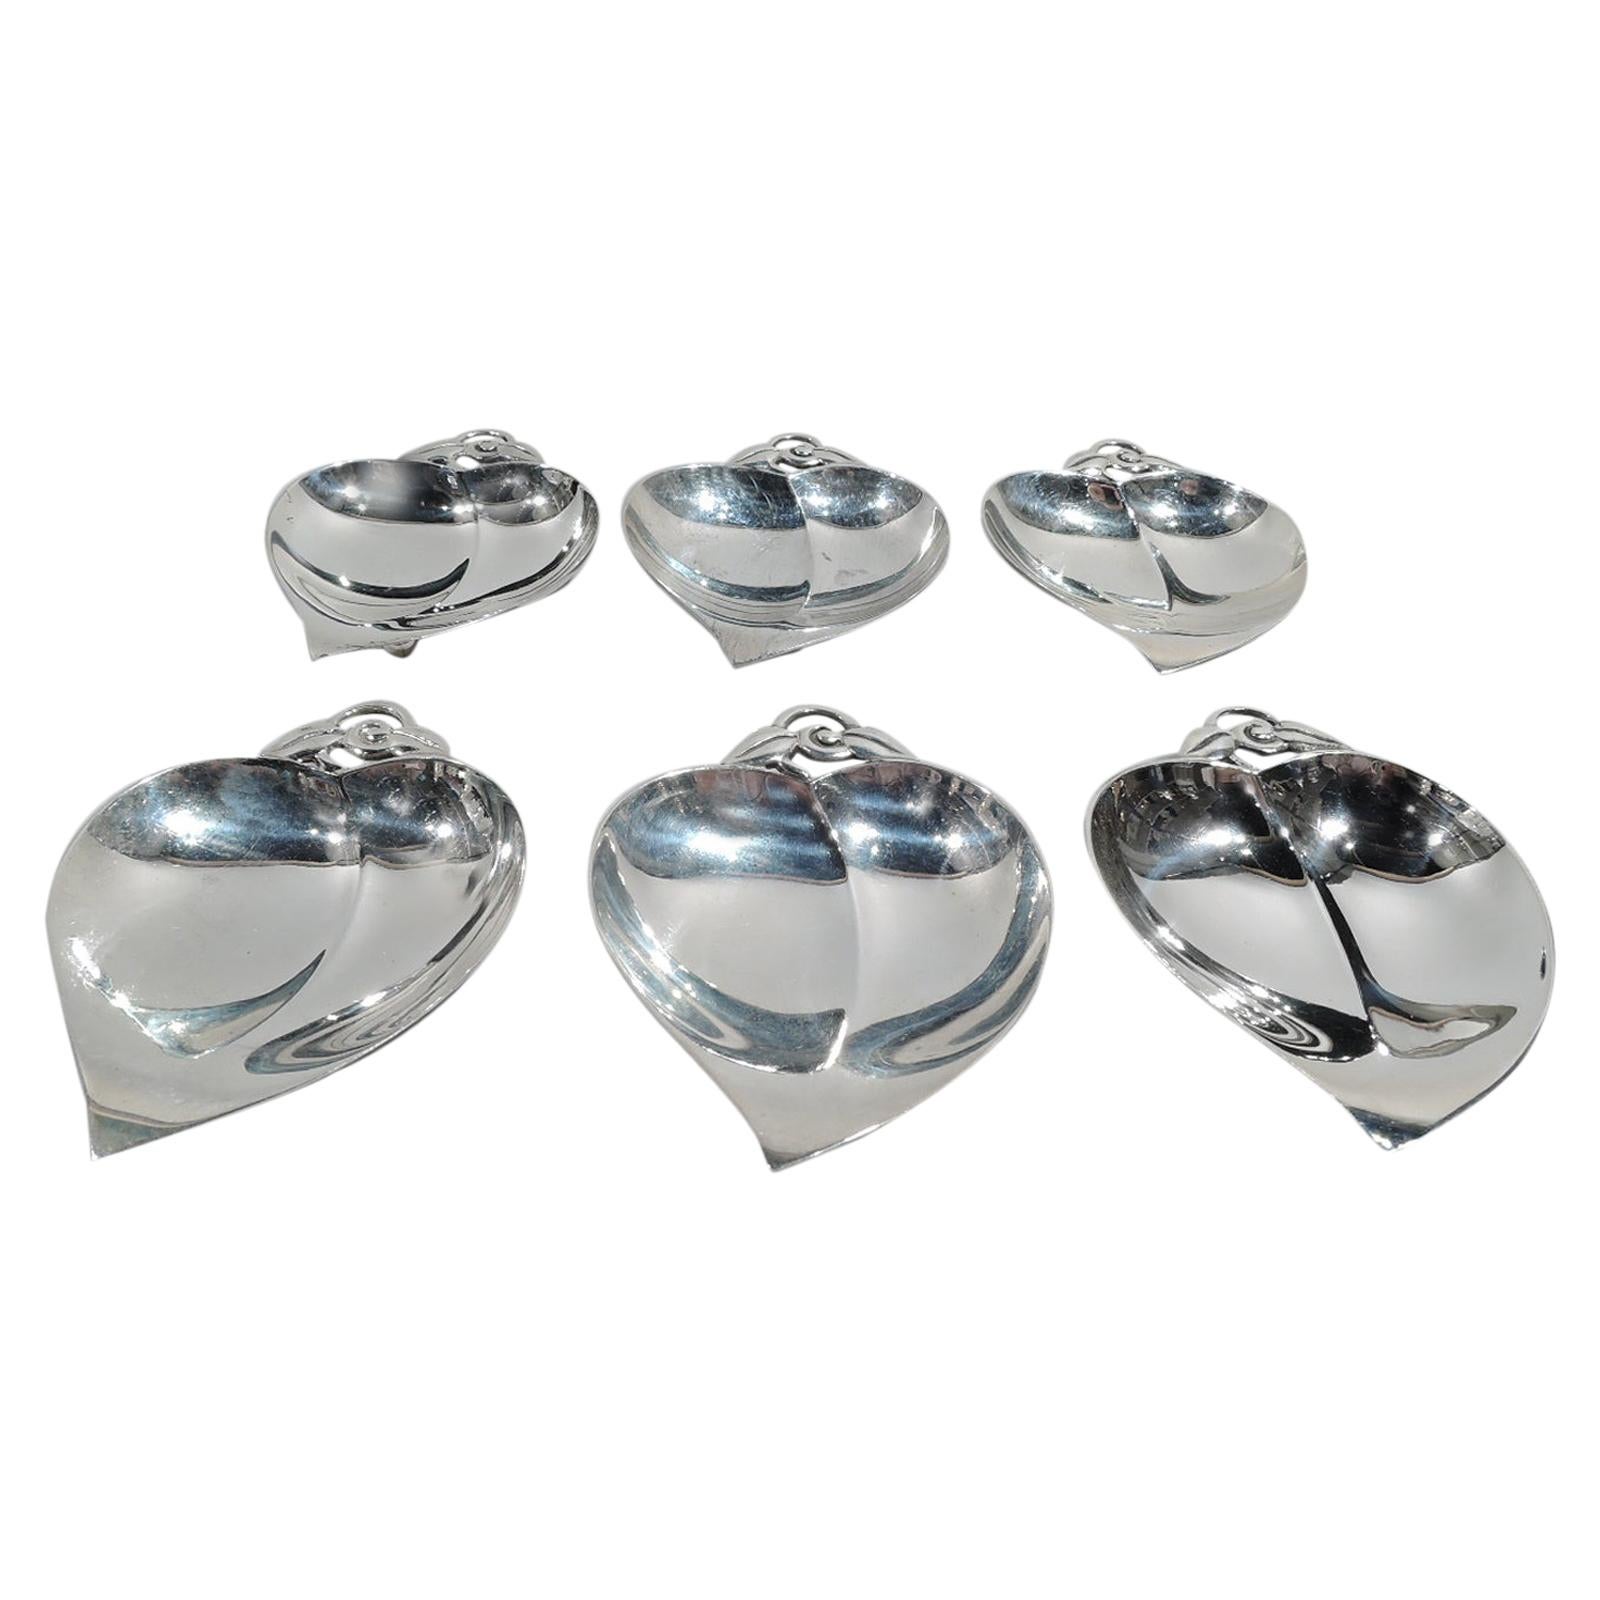 Set of 6 Tiffany Mid-Century Modern Sterling Silver Nut Dishes